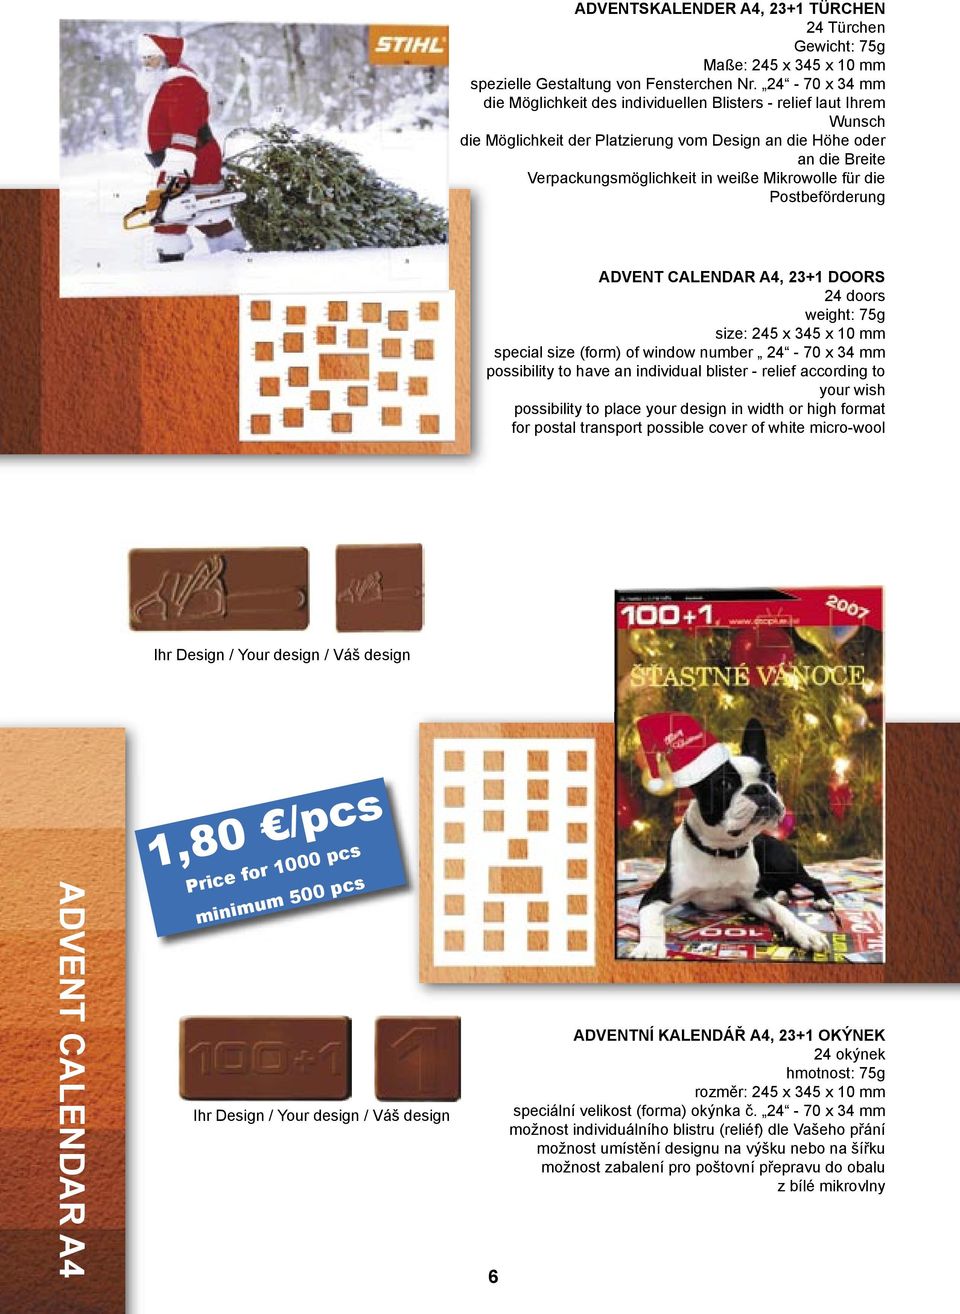 Mikrowolle für die Postbeförderung ADVENT CALENDAR A4, 23+1 DOORS 24 doors weight: 75g size: 245 x 345 x 10 mm special size (form) of window number 24-70 x 34 mm possibility to have an individual